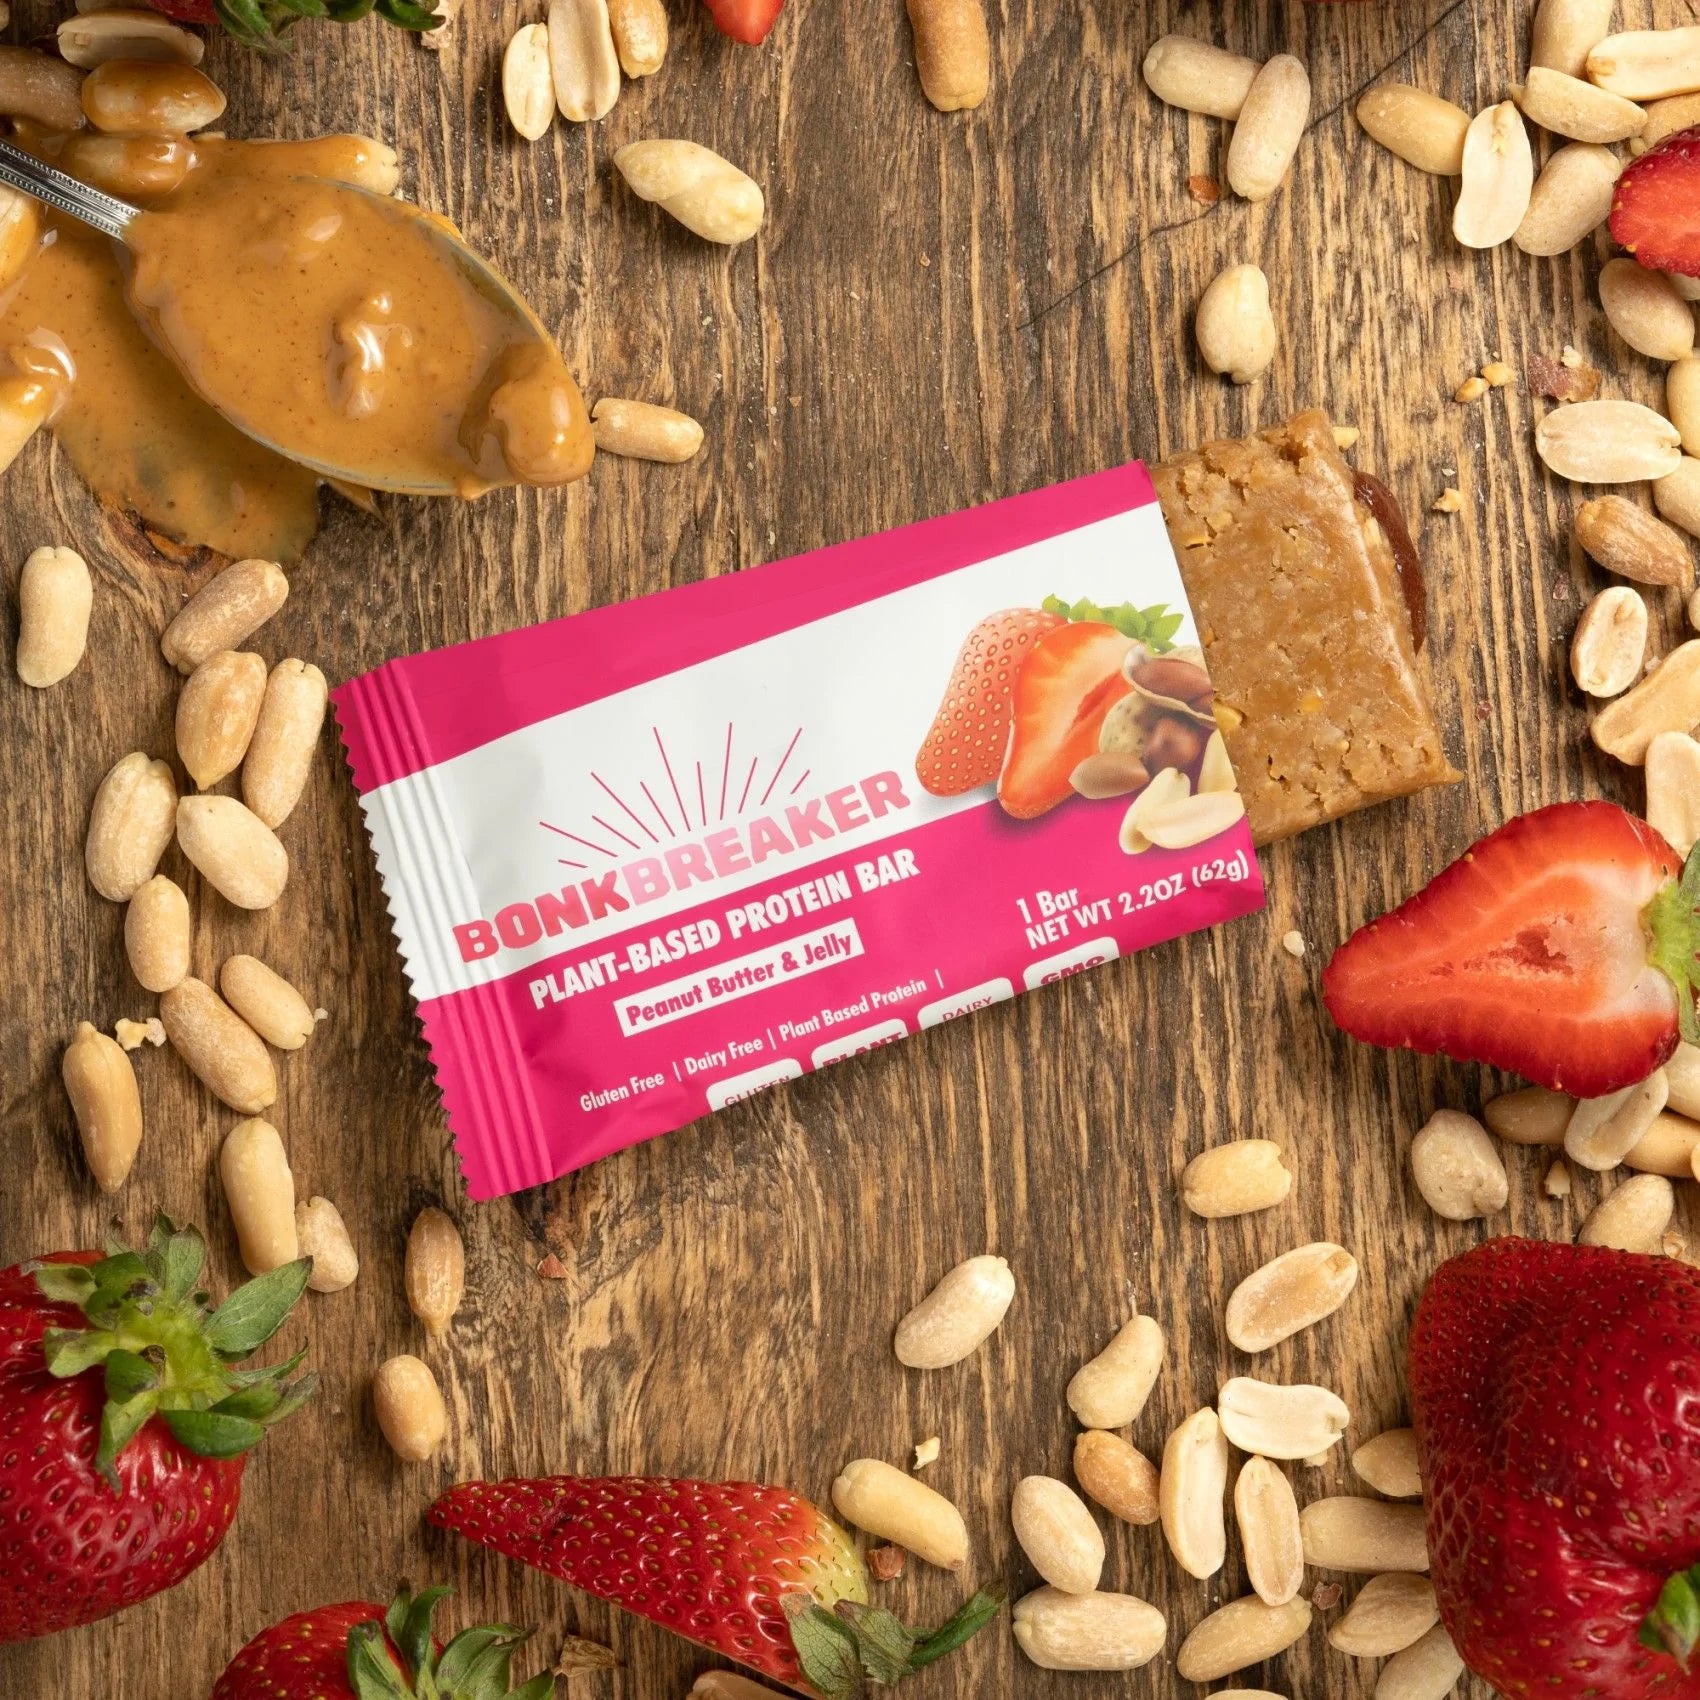 Bonk Breaker Peanut Butter and Jelly Plant-Based Protein Bar on a table with peanuts, peanut butter, and strawberries